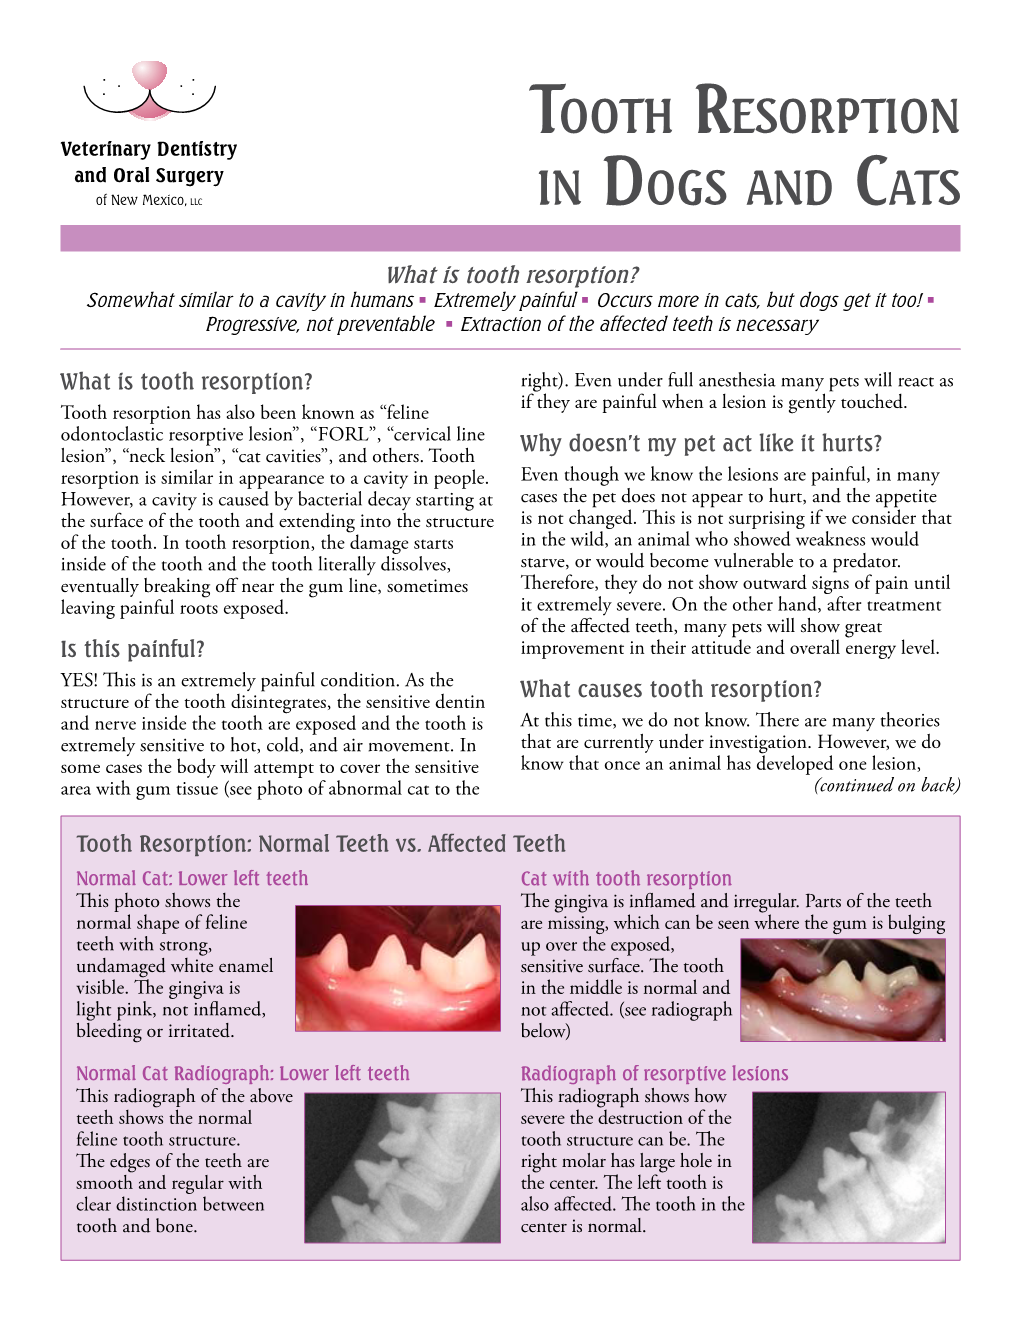 Tooth Resorption in Dogs and Cats